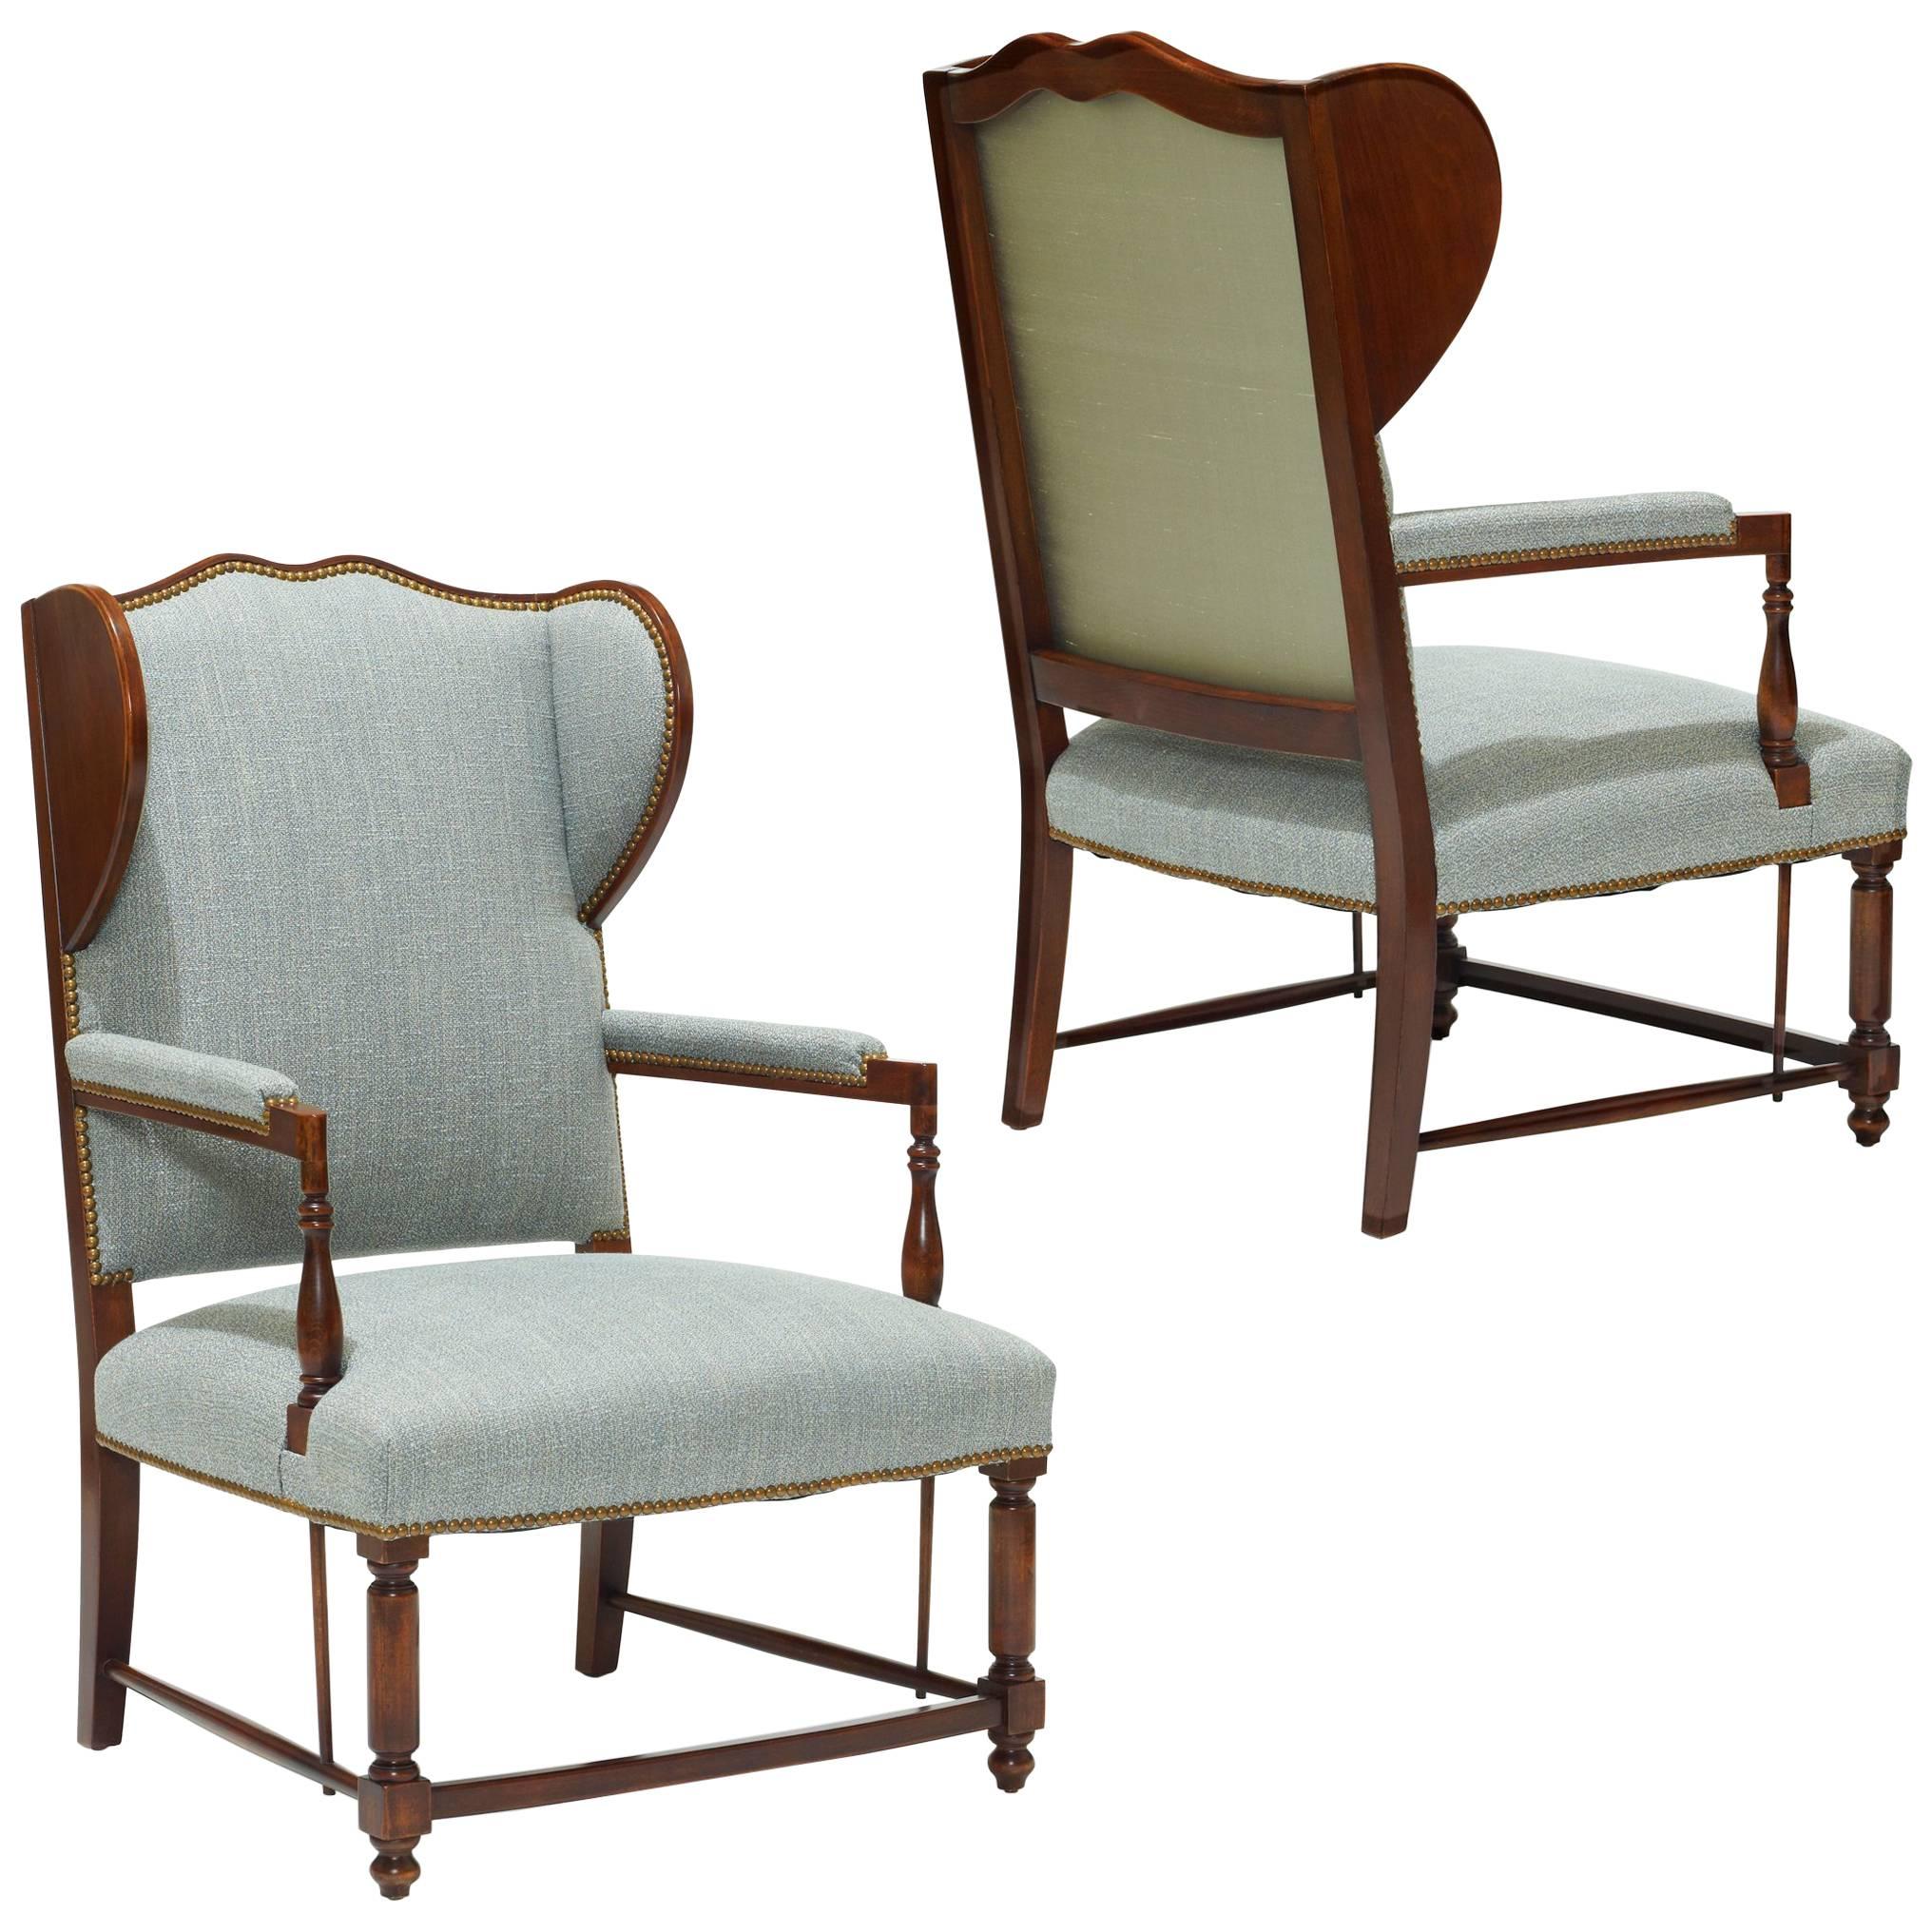 Swedish Art Deco Reinterpretations of Traditional Winged Back Chairs in Birch For Sale